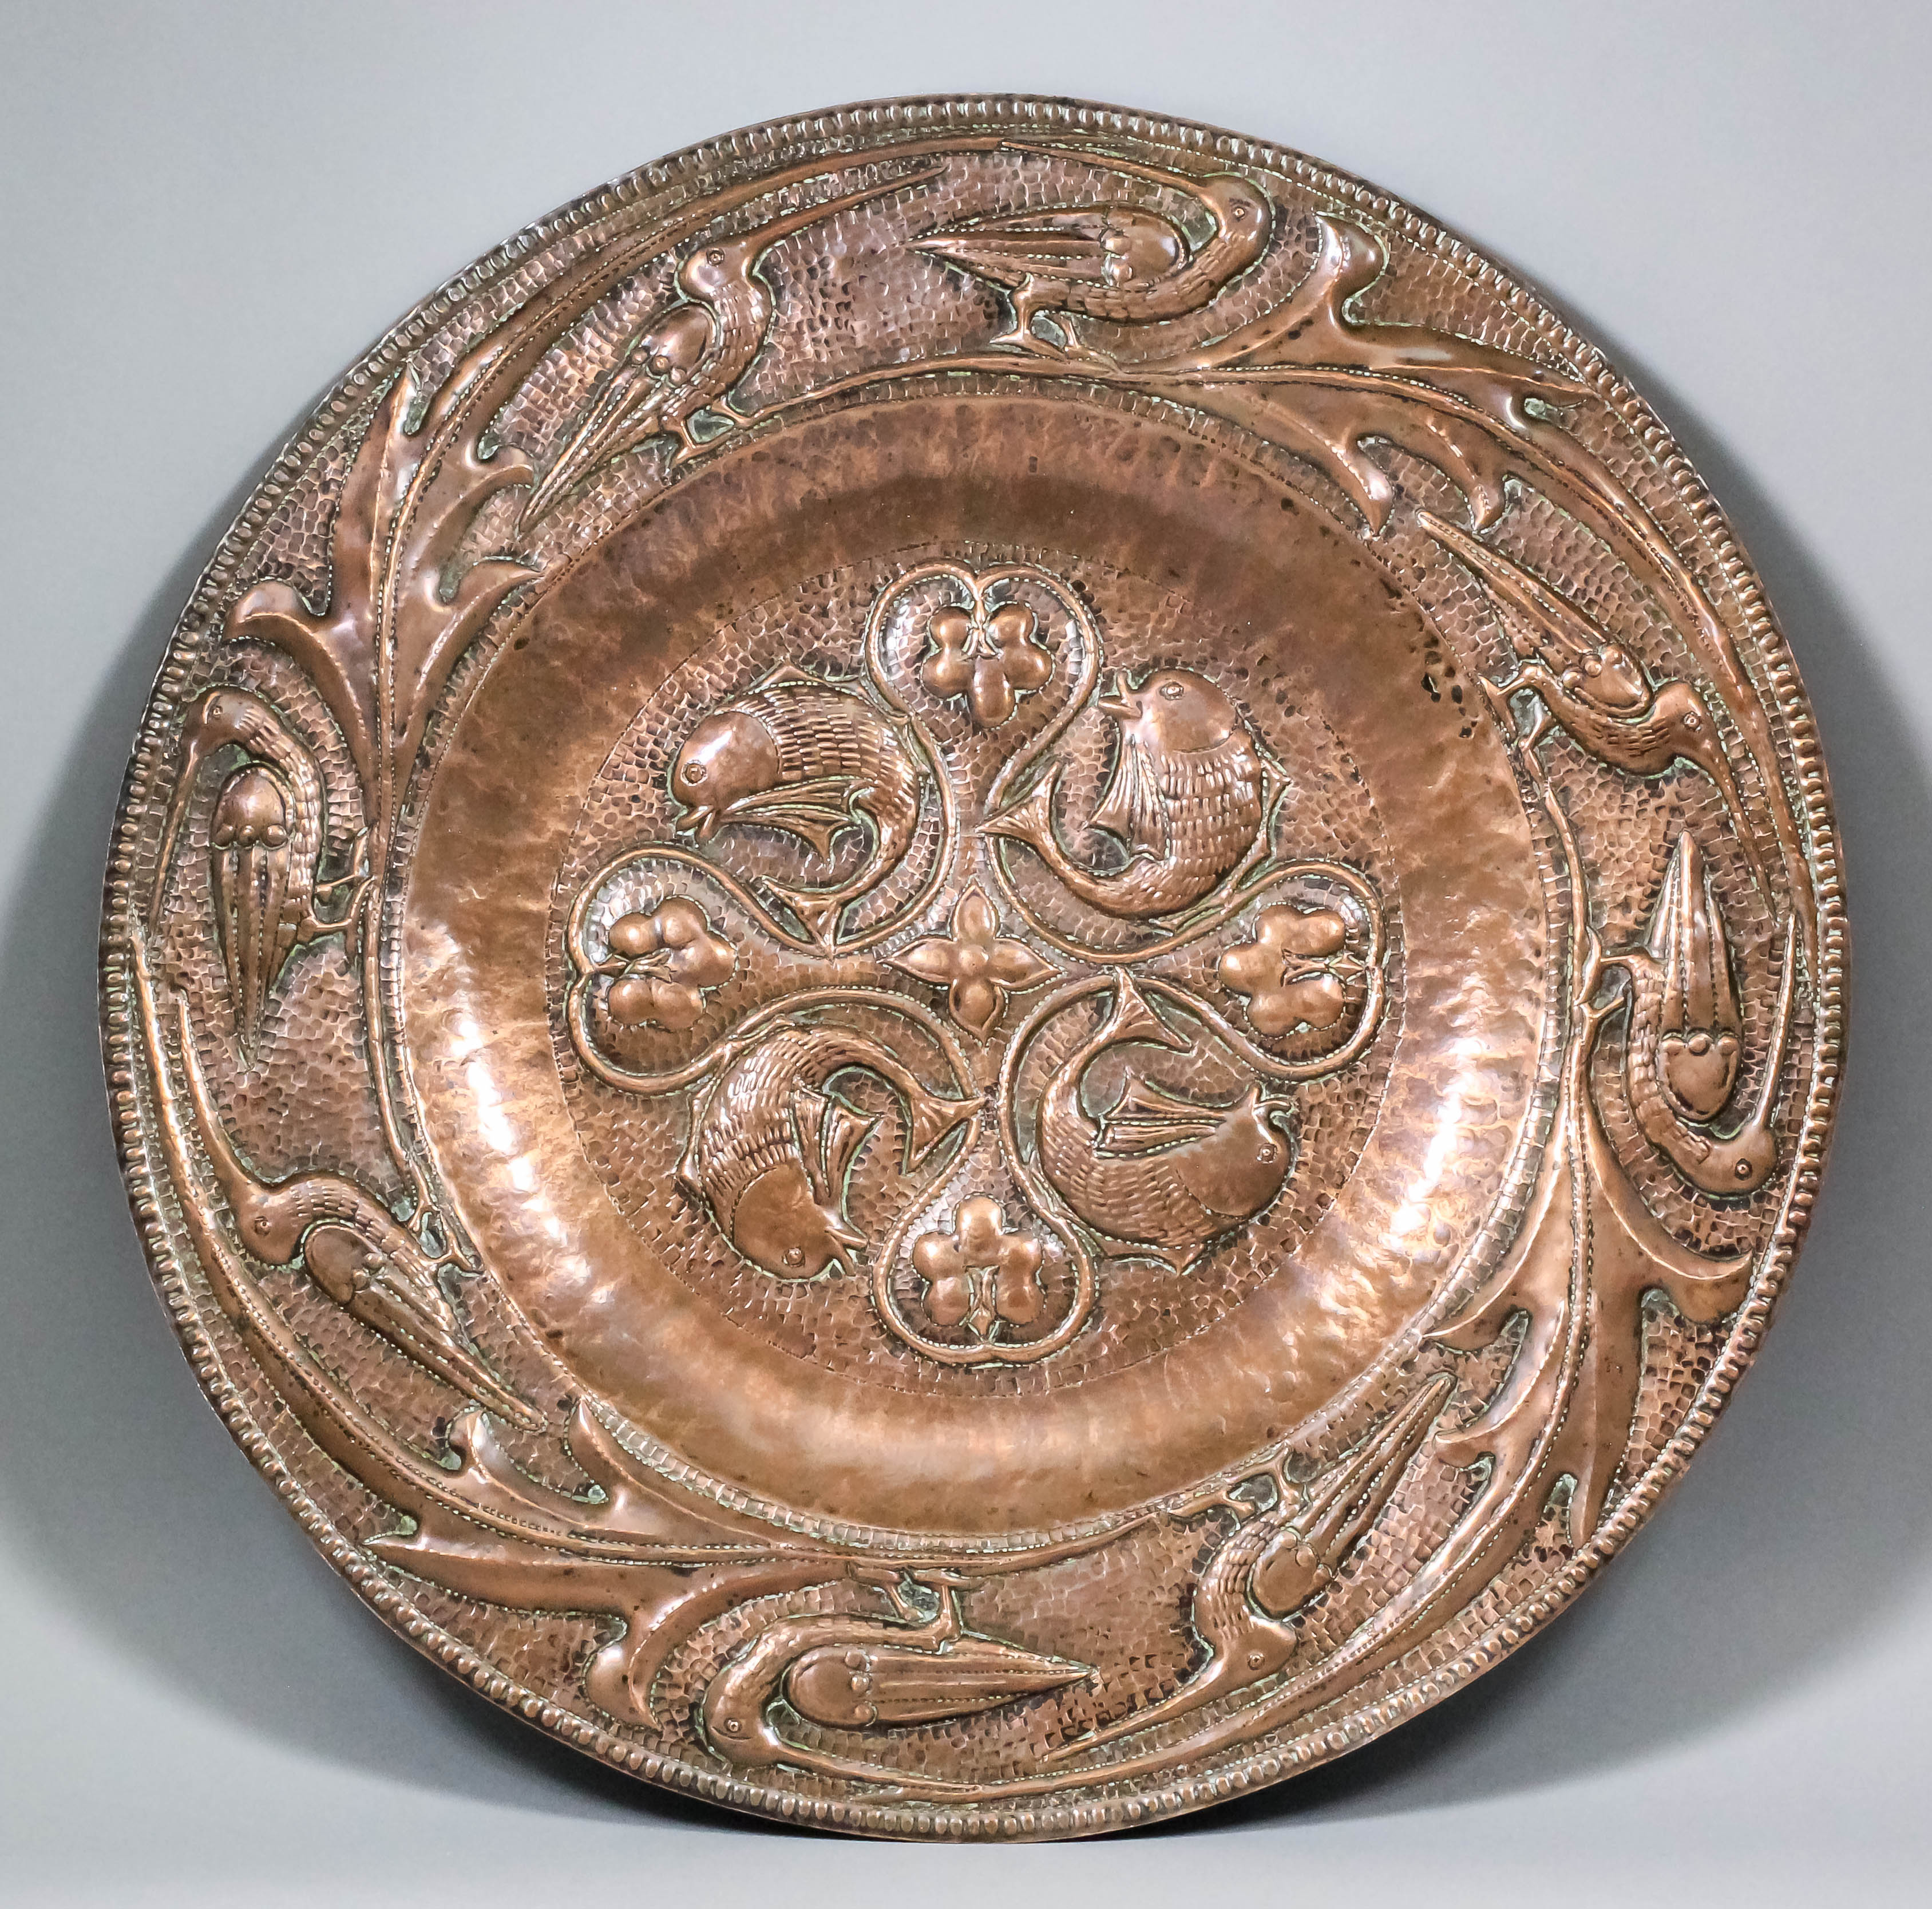 An early 20th Century Arts and Crafts embossed copper circular charger by John Pearson (1859-1930)